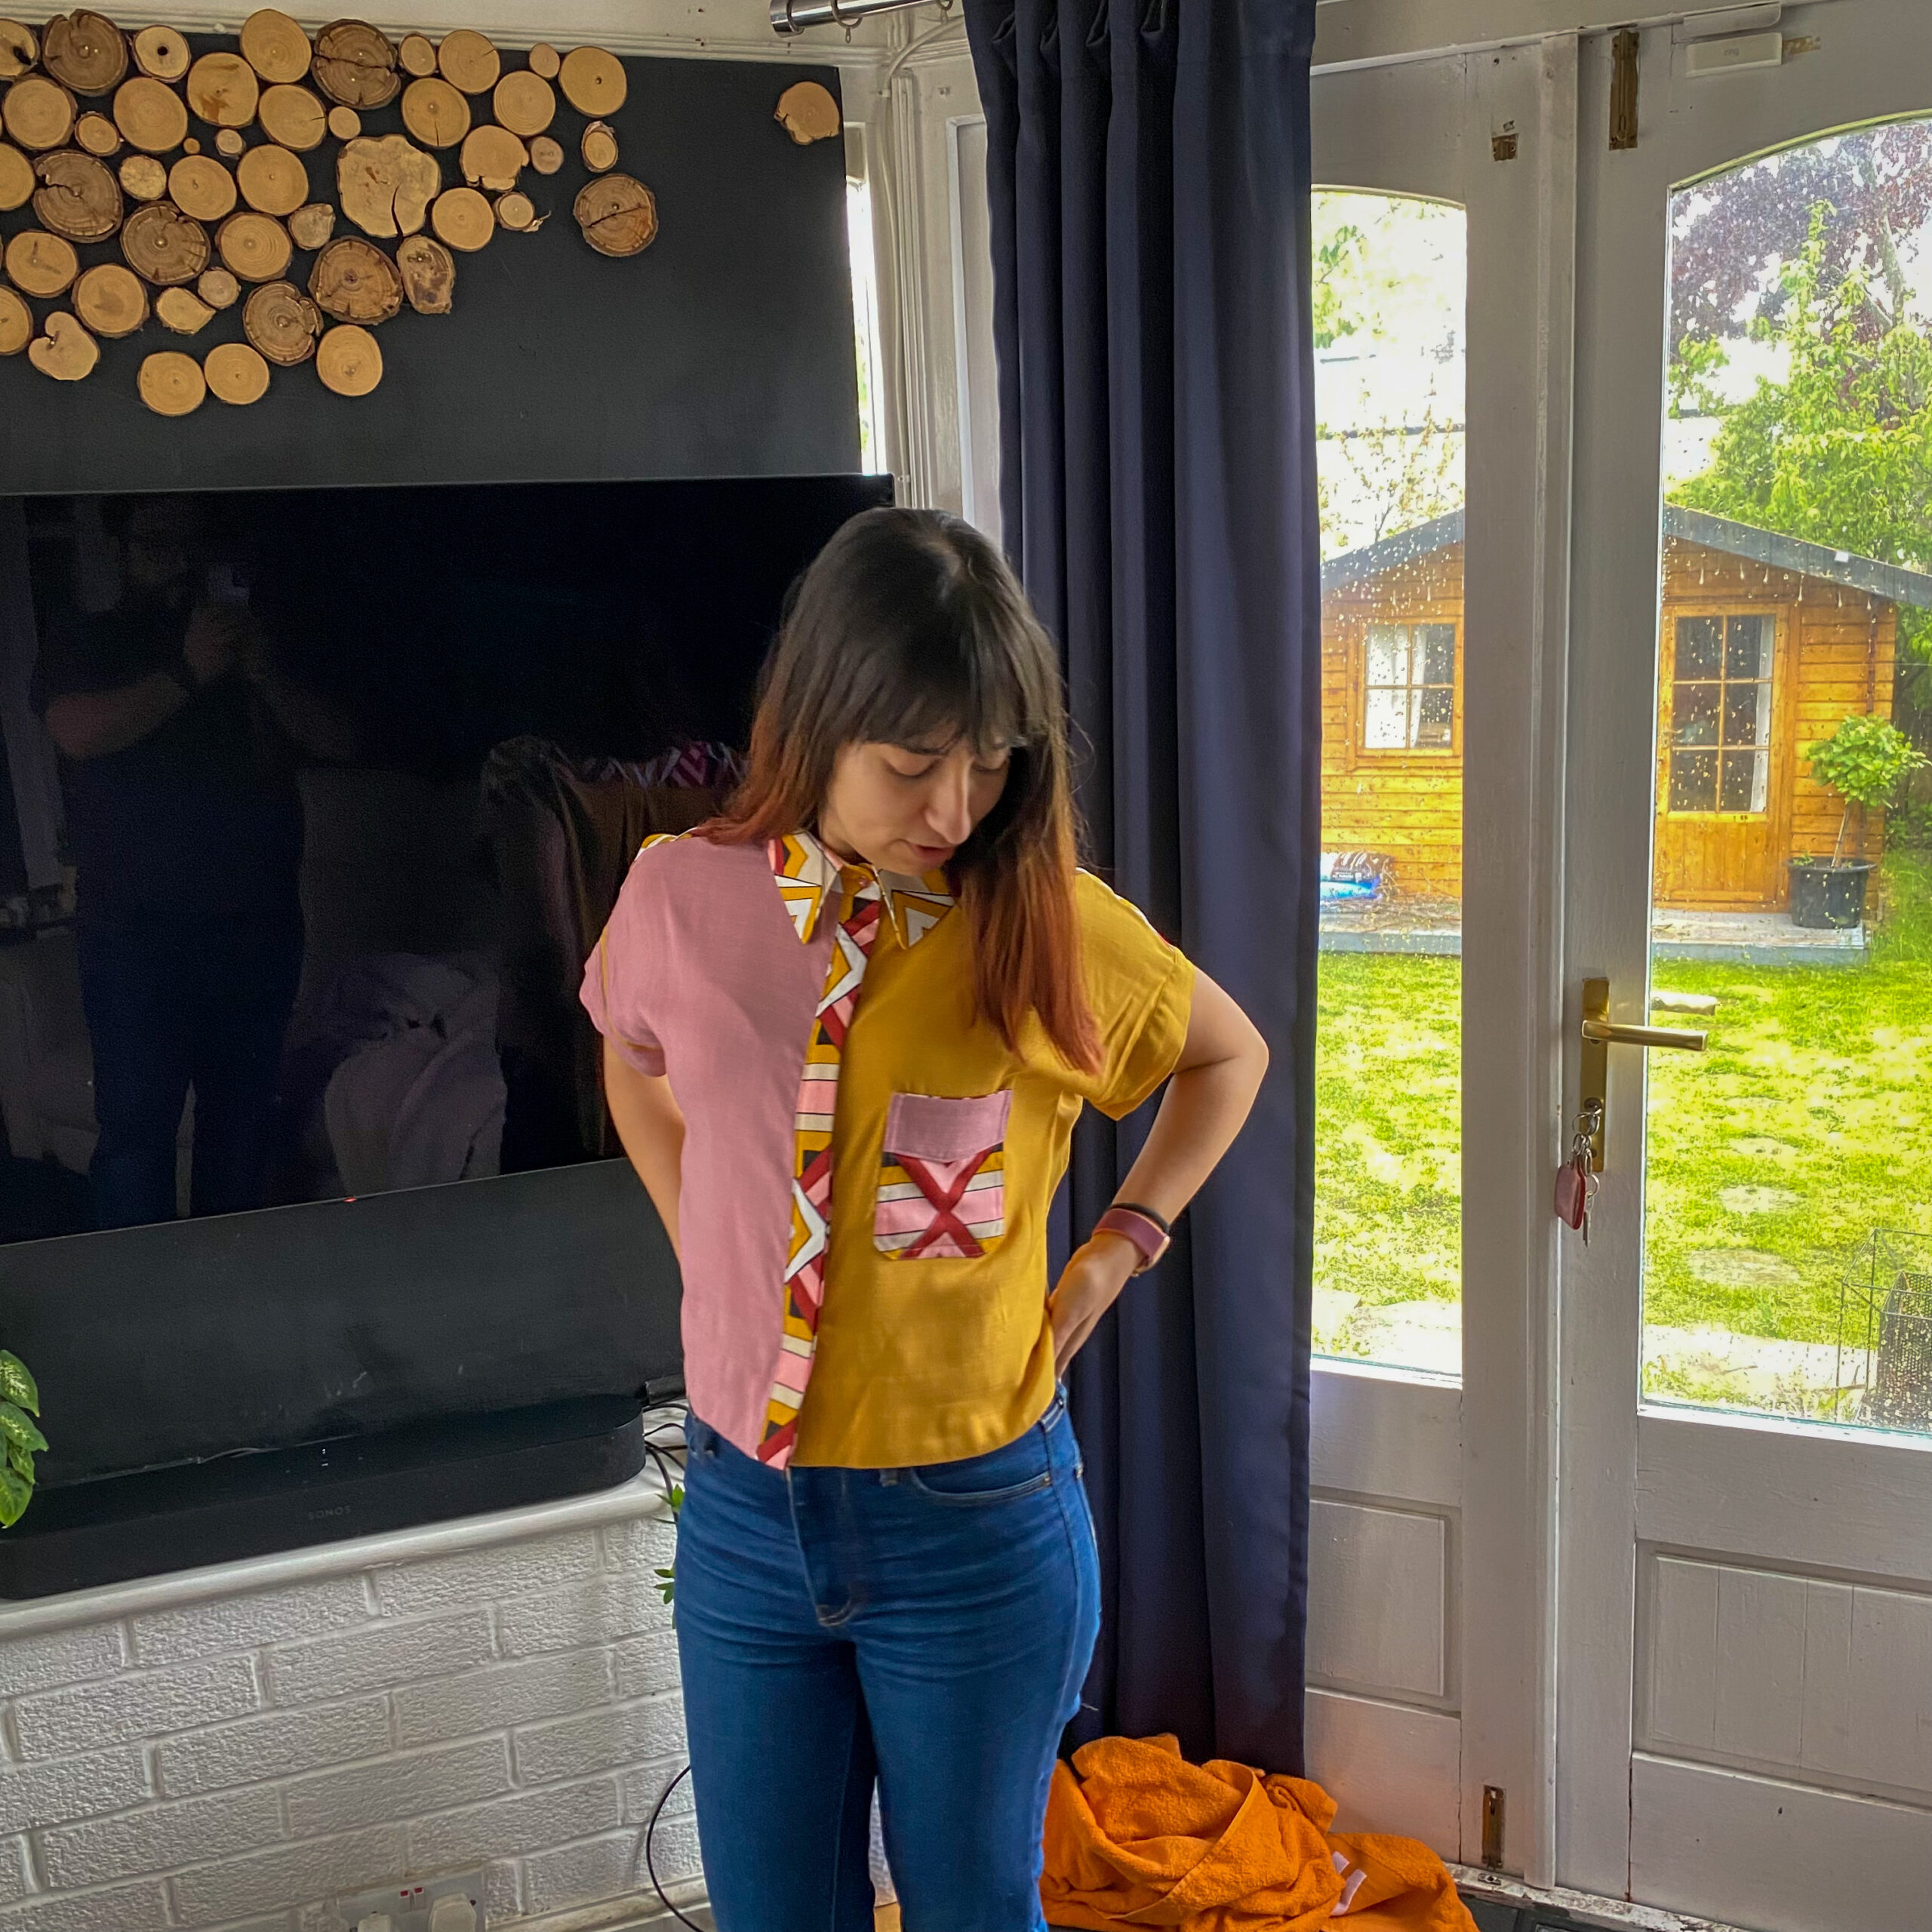 Andreia, a white woman with brown hair is looking down with hands in the back pockets of her jeans. She is wearing a half yellow and half pink shirt with african wax fabric